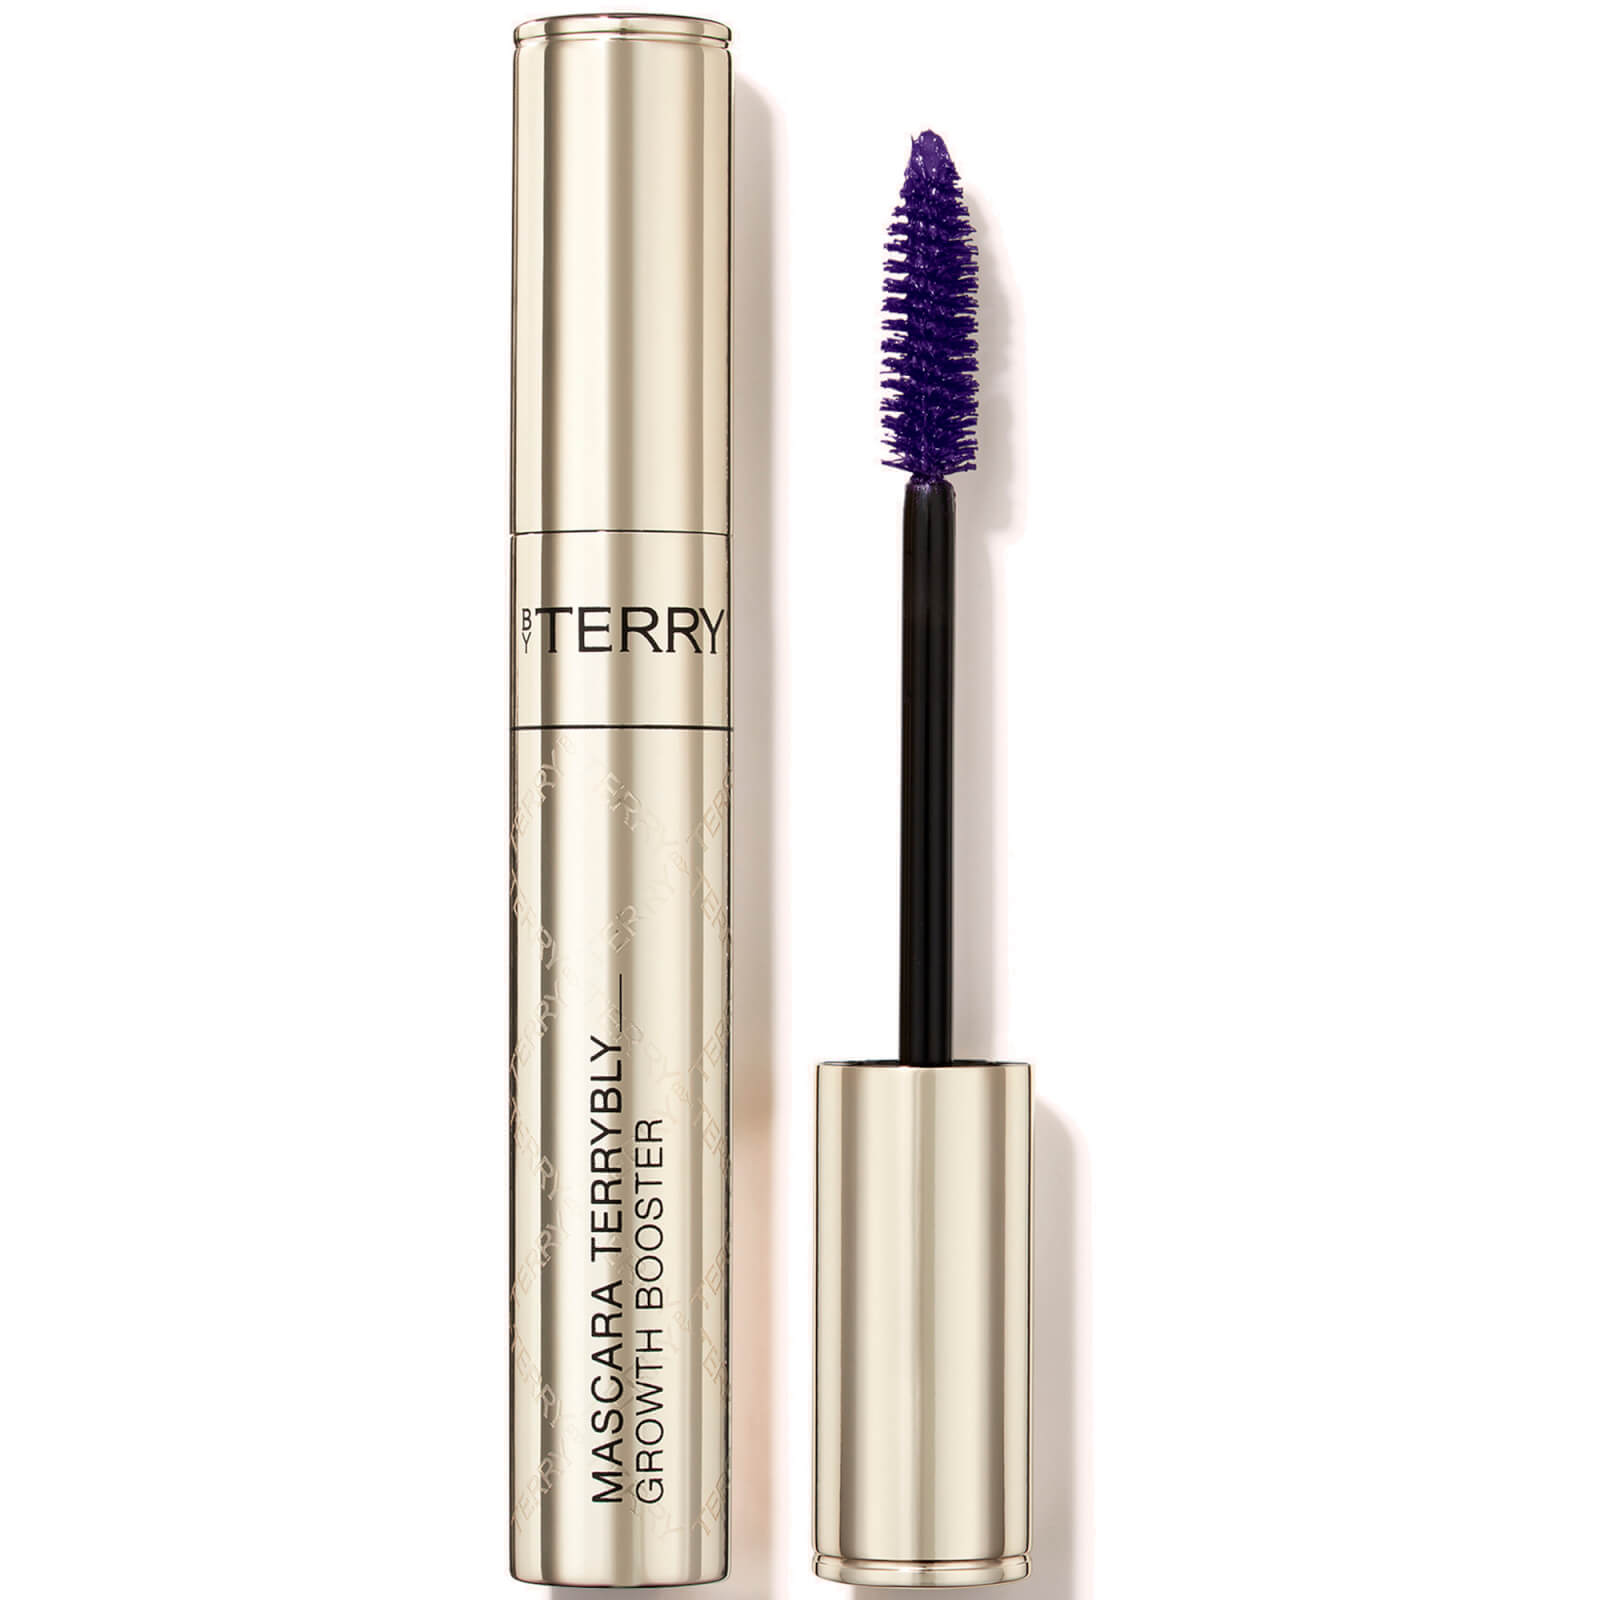 By Terry Terrybly Mascara 8ml (Various Shades) - 4. Purple Success